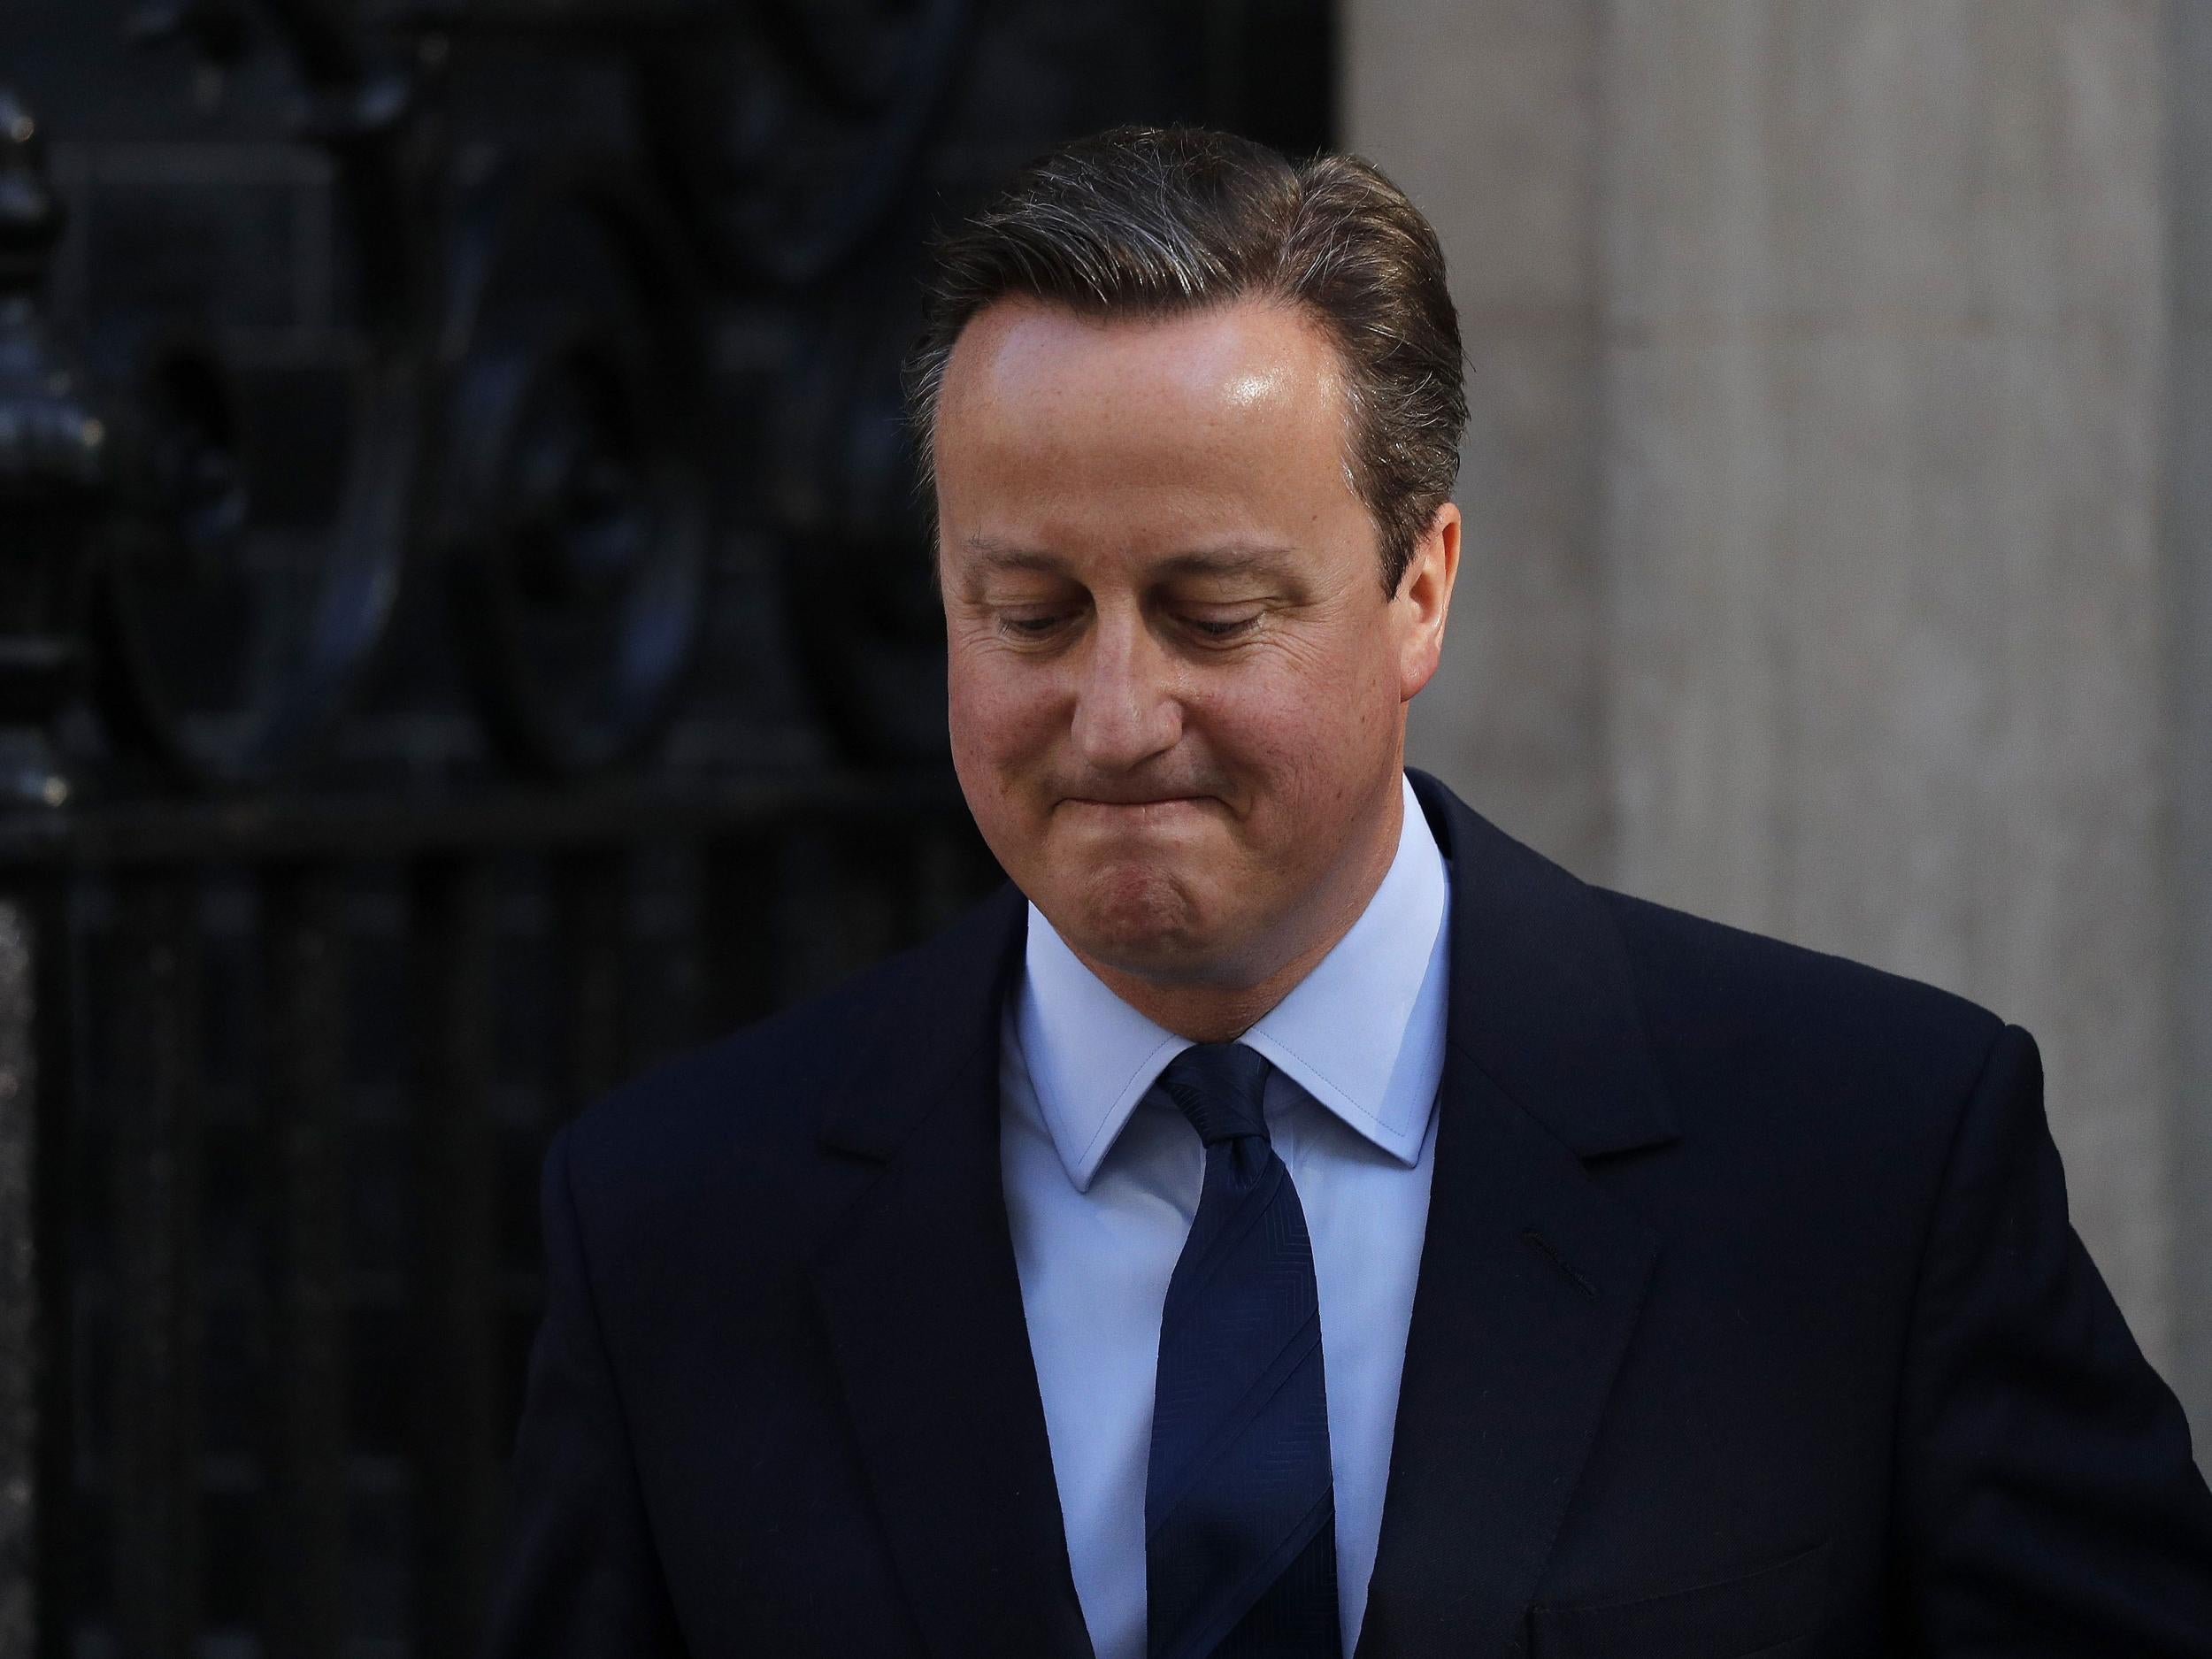 Mr Cameron said he would resign in three months